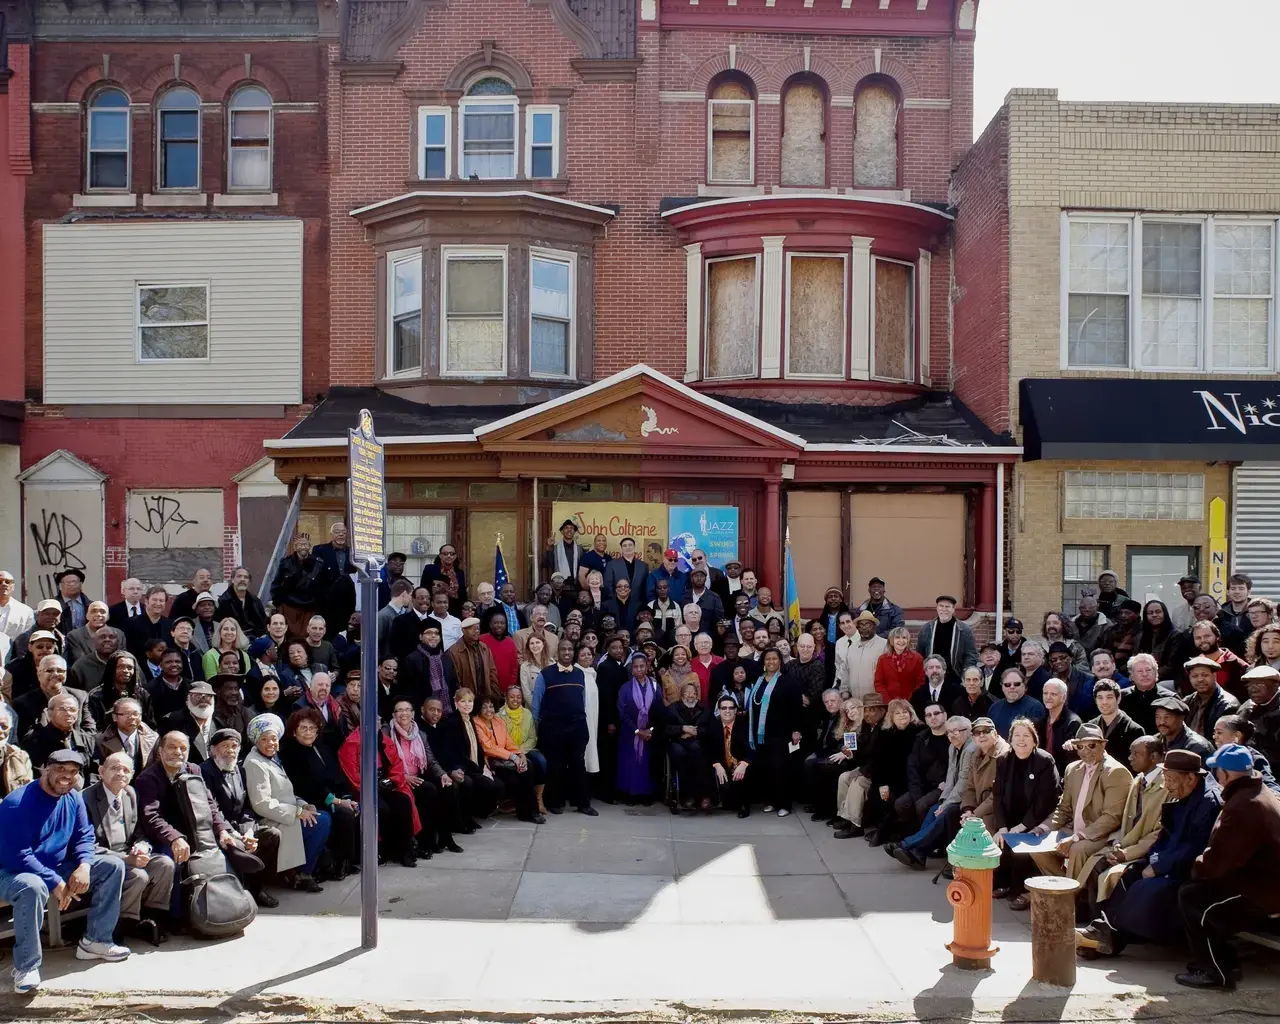 Documenting &amp; Interpreting the Philly Jazz Legacy, "A Great Day in Philadelphia,"&nbsp;2012. Photo by Elena Bouvier.